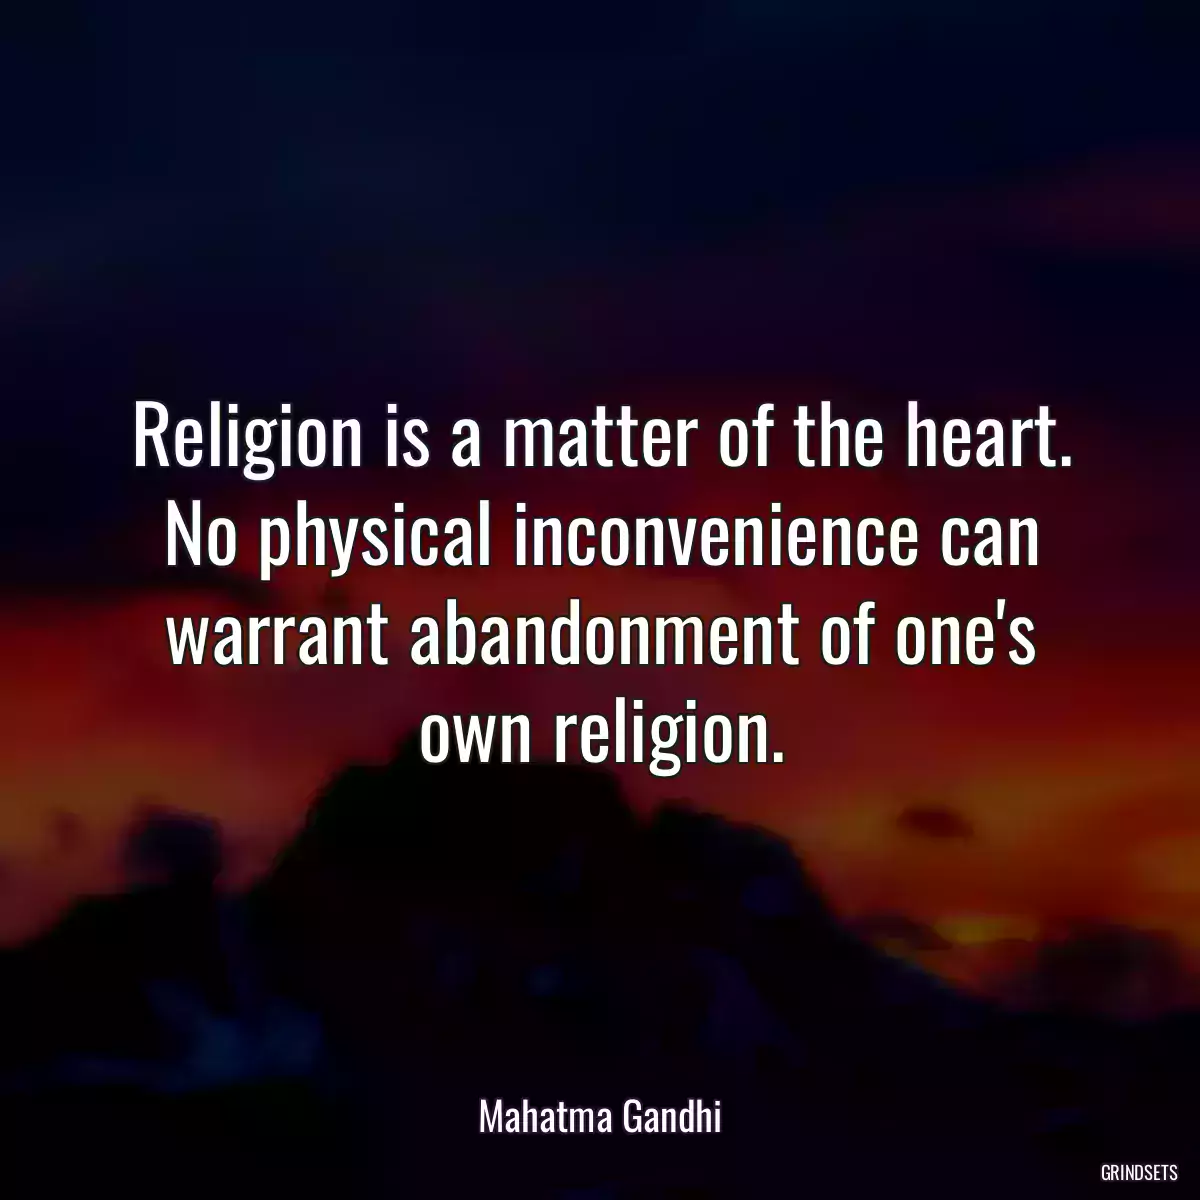 Religion is a matter of the heart. No physical inconvenience can warrant abandonment of one\'s own religion.